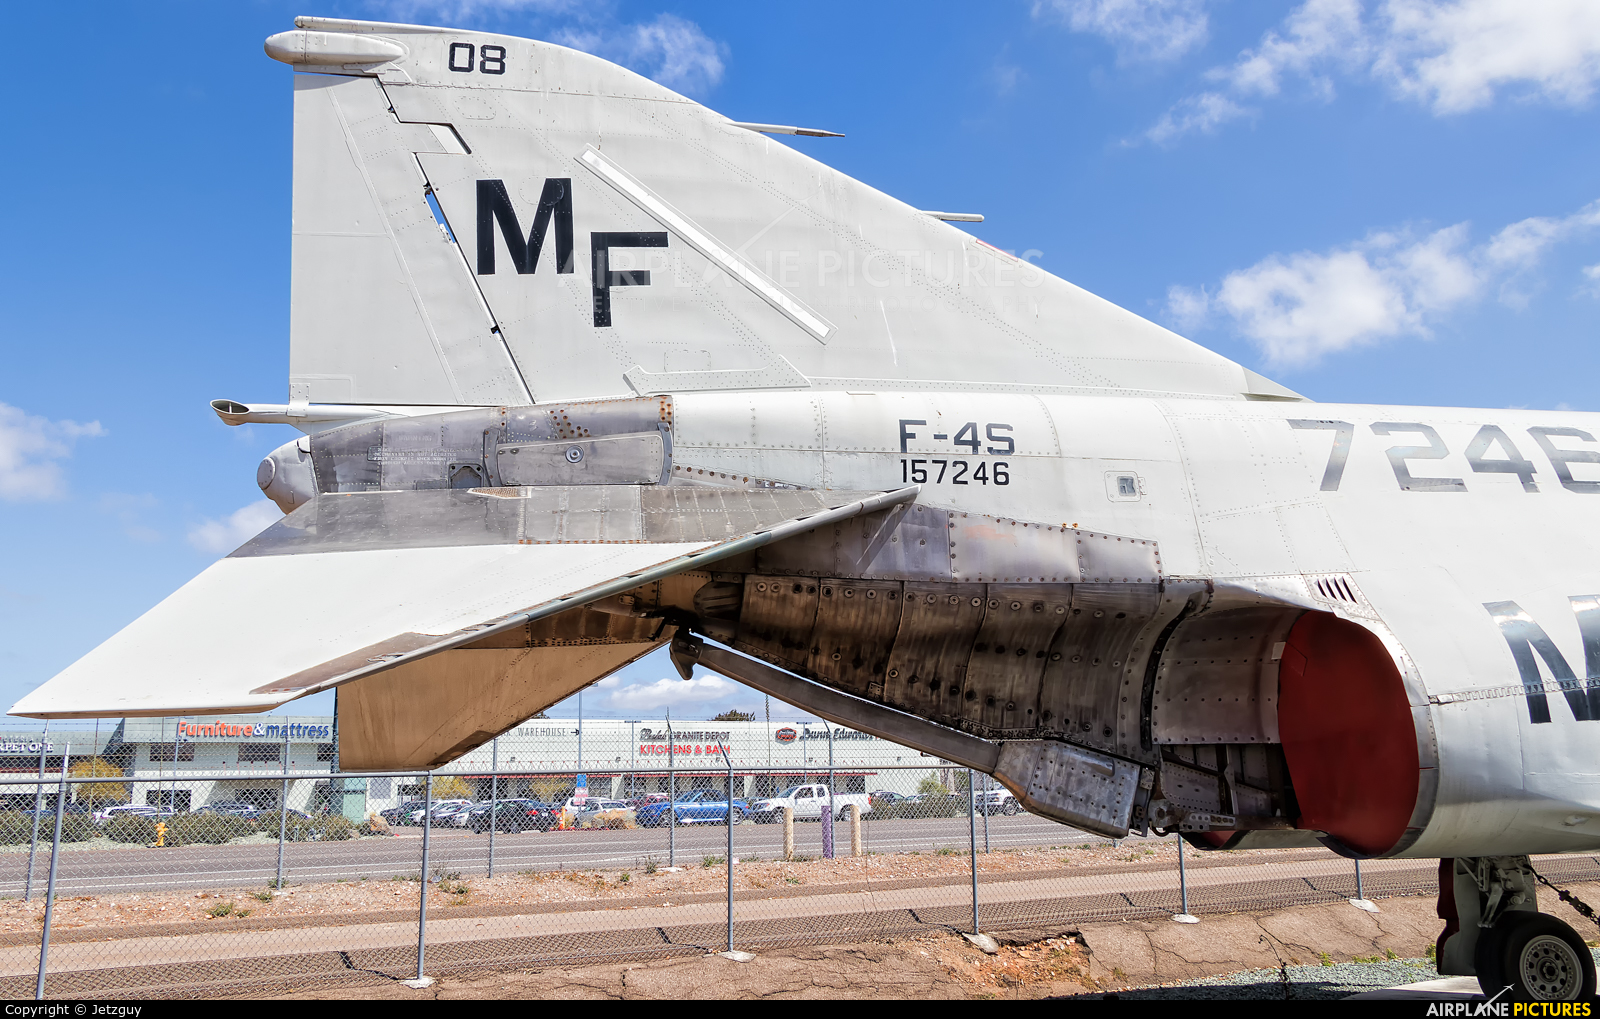 USA - Marine Corps 157246 aircraft at Miramar MCAS - Flying Leatherneck Aviation Museum